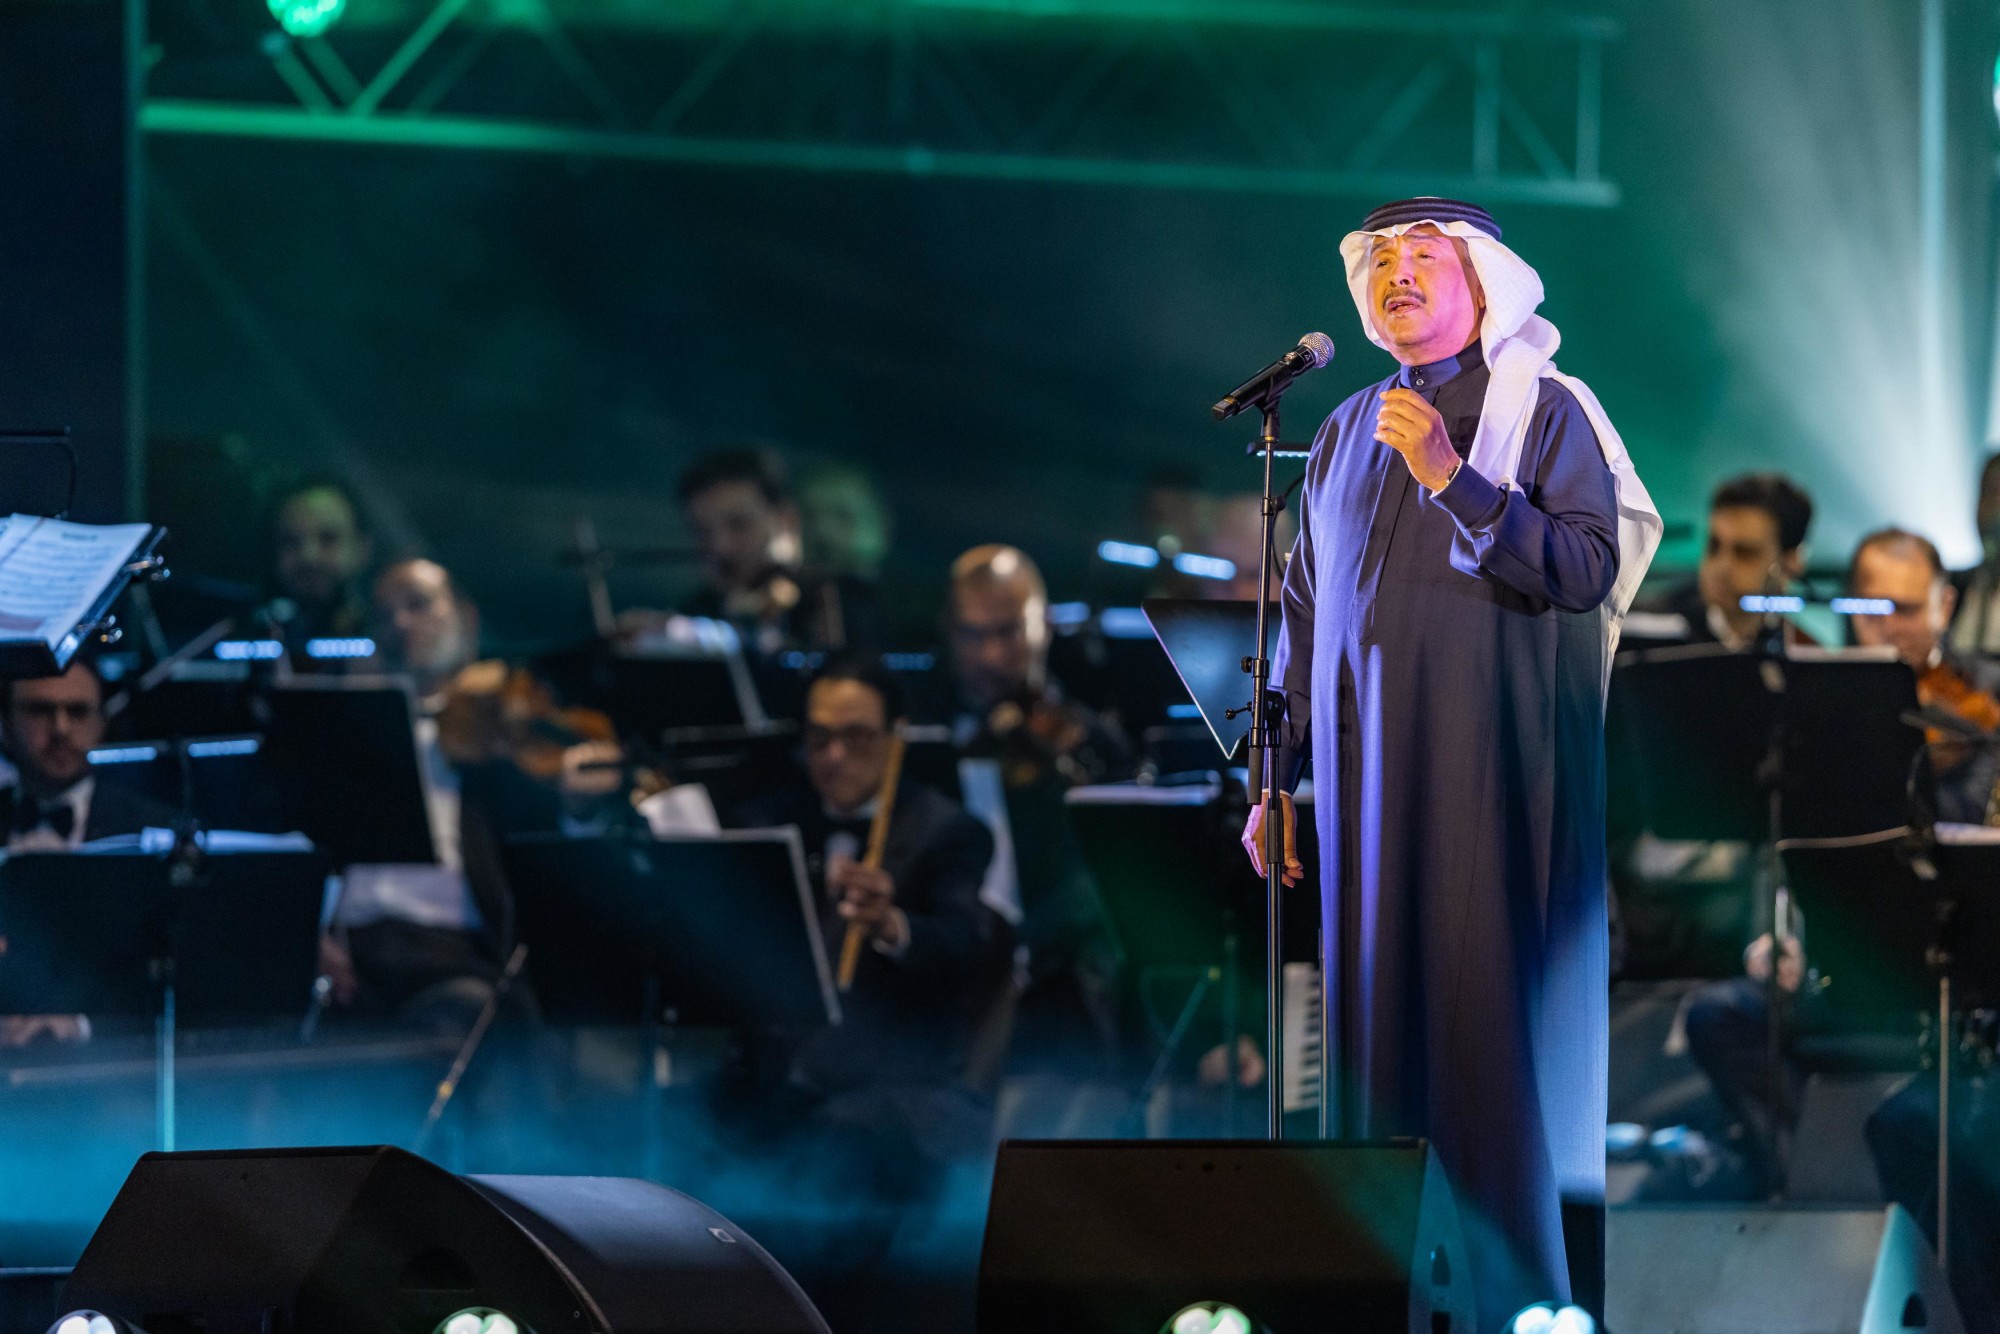 Mohammed Abdo performs at Jubilee Stage during the Kingdom of Saudi Arabia National Day m30540